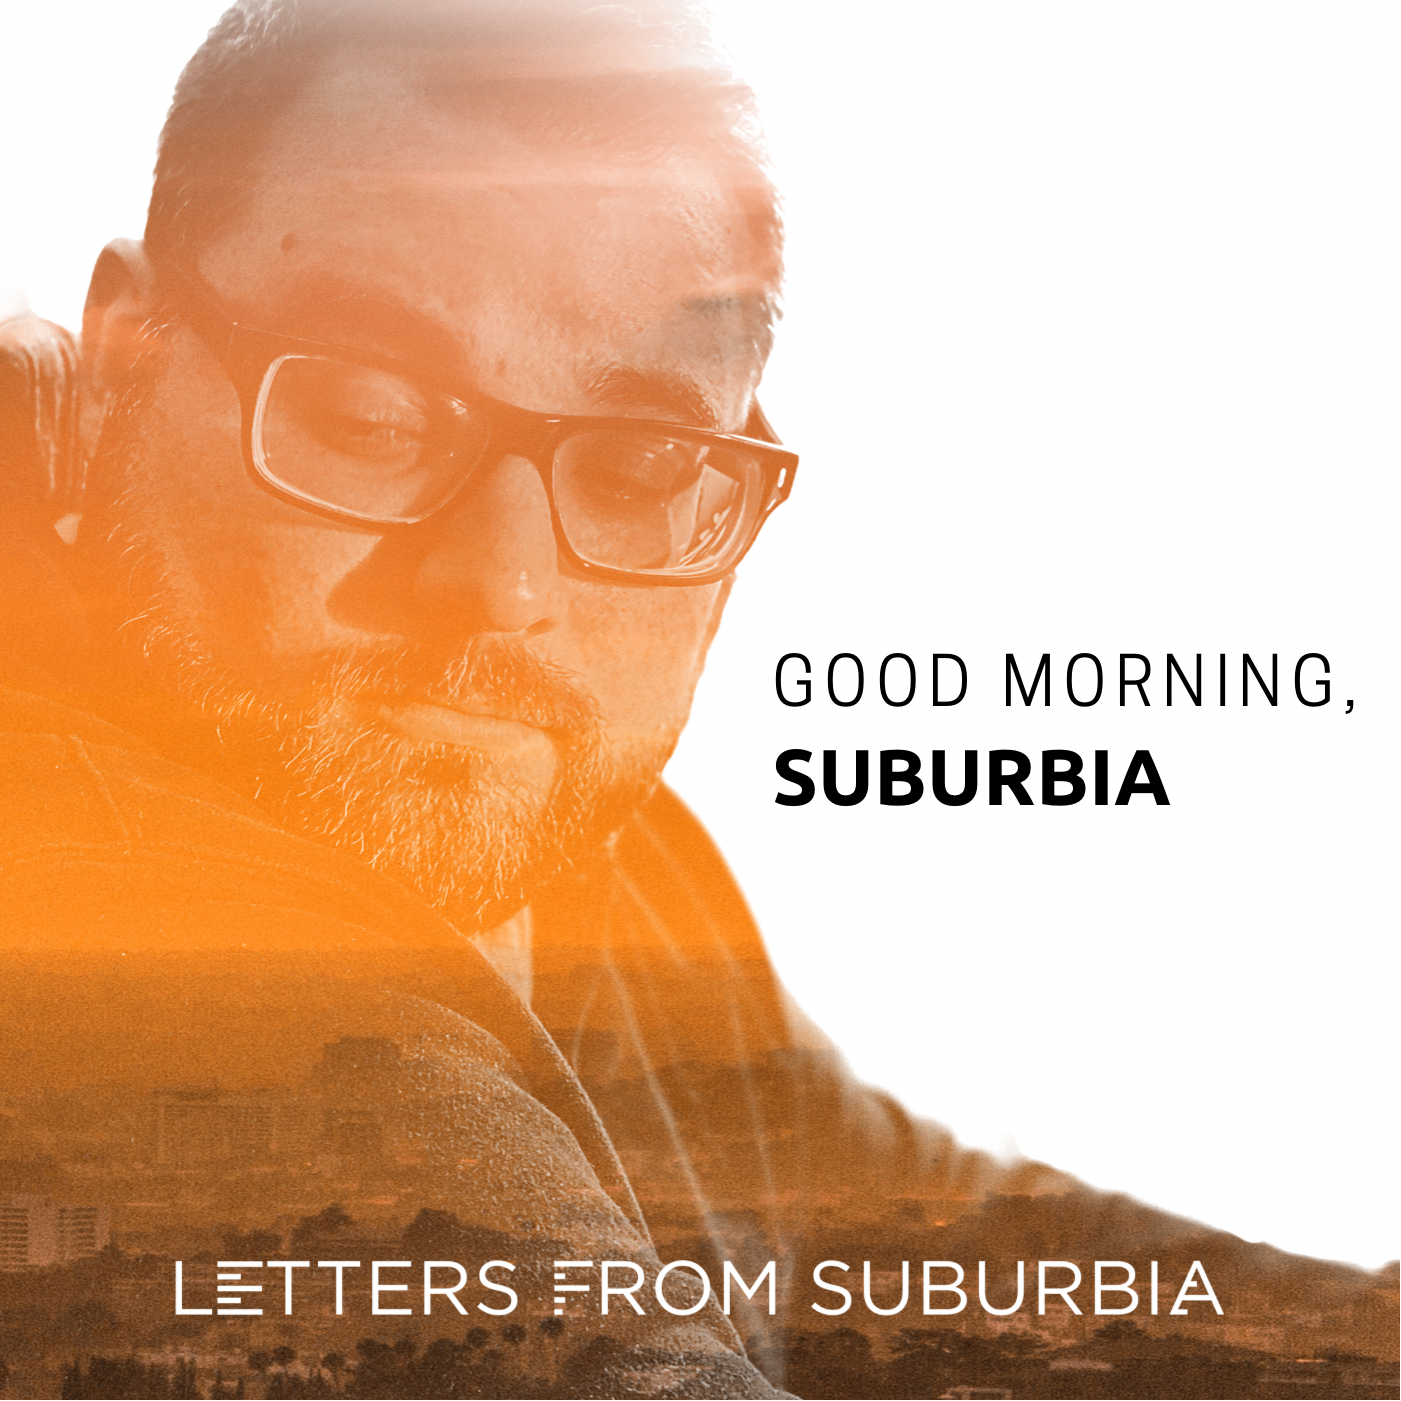 Letters from Suburbia - Good Morning, Suburbia